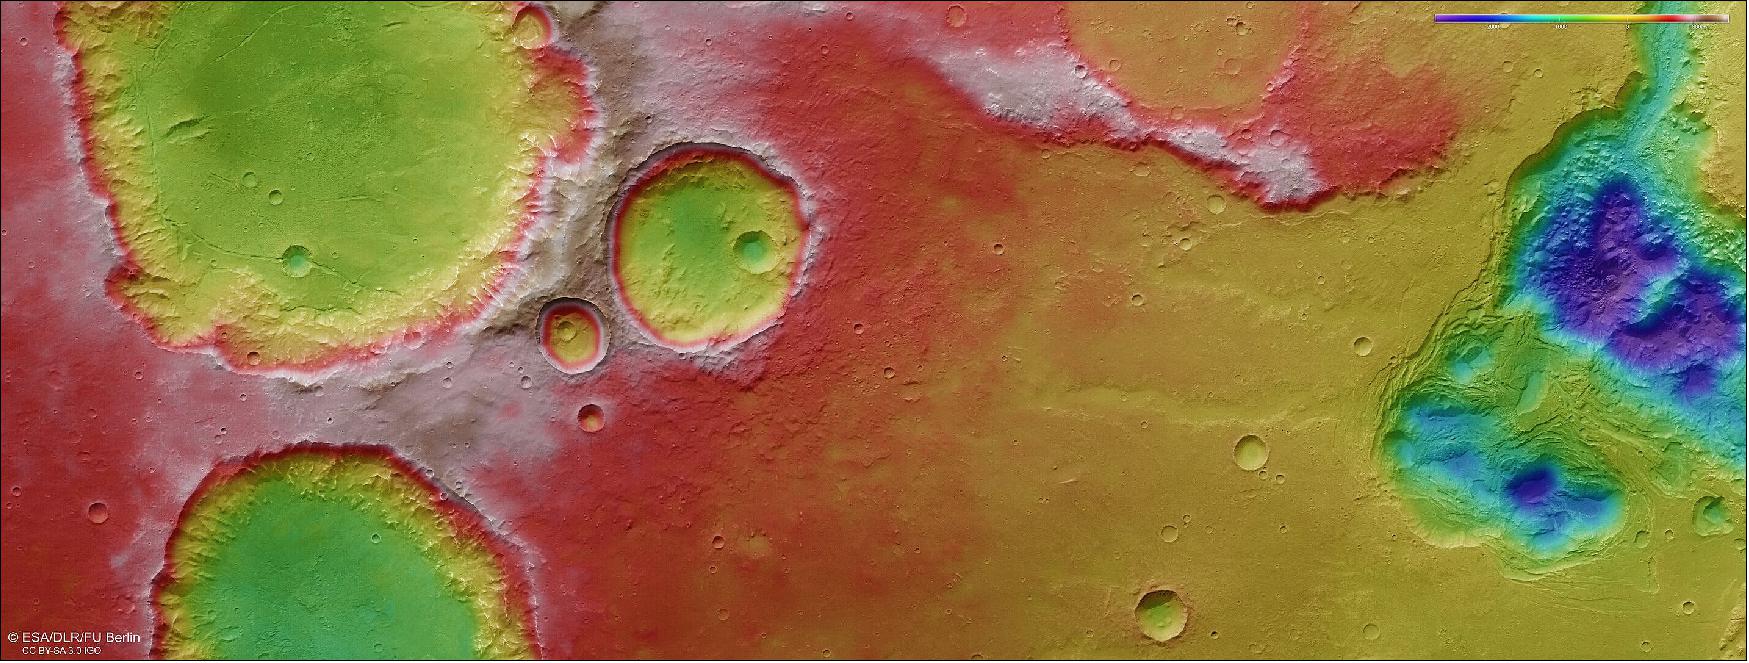 Figure 67: This color-coded topographic image shows craters, valleys and chaotic terrain in Mars’ Pyrrhae Regio, based on data gathered by the Mars Express High Resolution Stereo Camera (HRSC) during orbit 20972 (3 August 2020). This view is based on a digital terrain model (DTM) of the region, from which the topography of the landscape can be derived; lower parts of the surface are shown in blues and purples, while higher altitude regions show up in whites, yellows and reds, as indicated on the scale to the top right. North is to the right (image credit: ESA/DLR/FU Berlin, CC BY-SA 3.0 IGO)